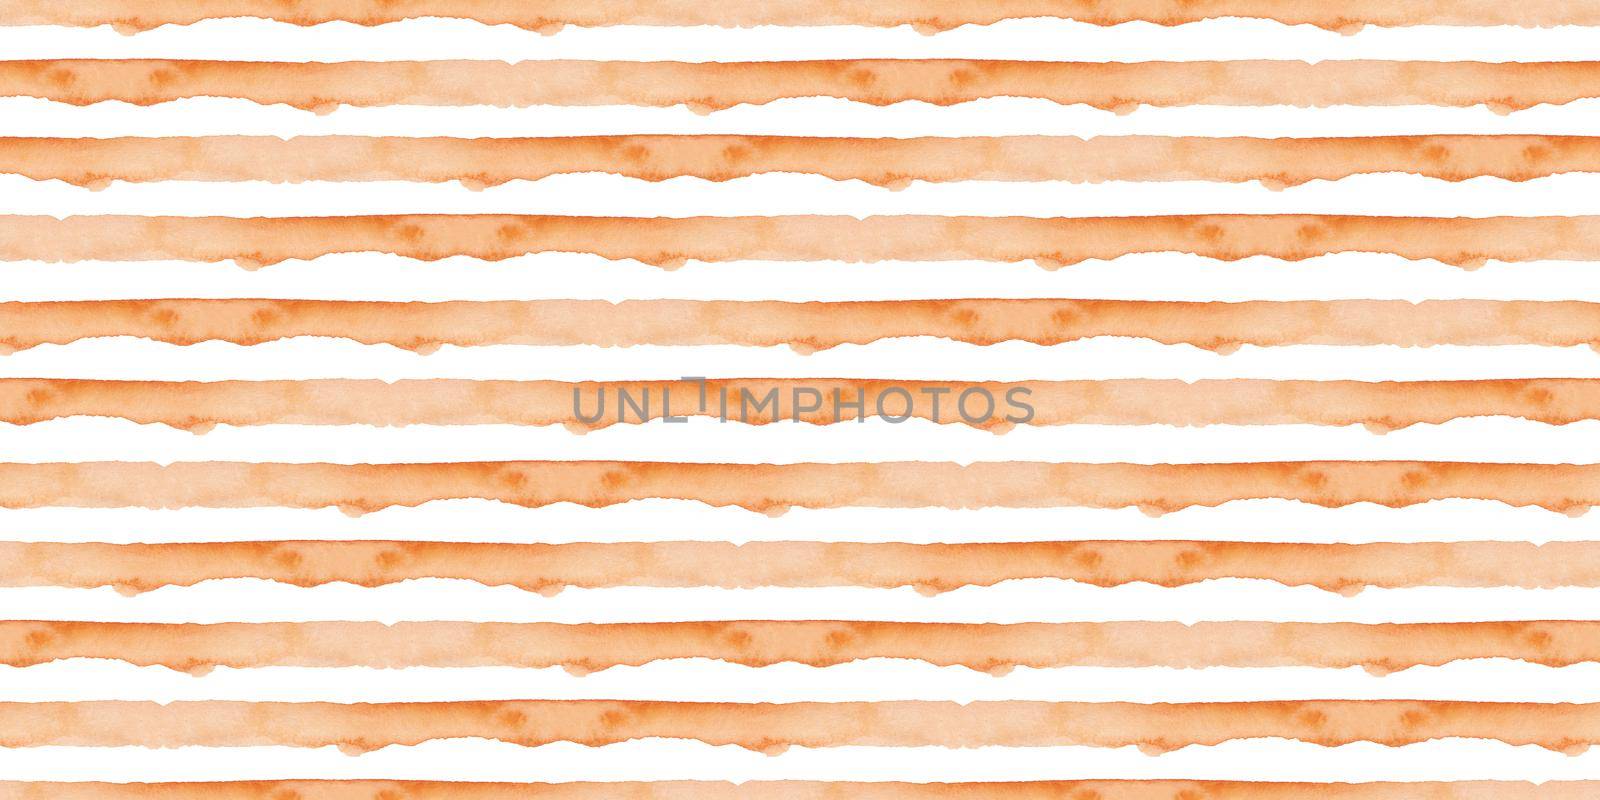 Orange Abstract Watercolor Geometric Background. Seamless Pattern with Stripes. Handmade Texture for Fabric Design and Wallpaper